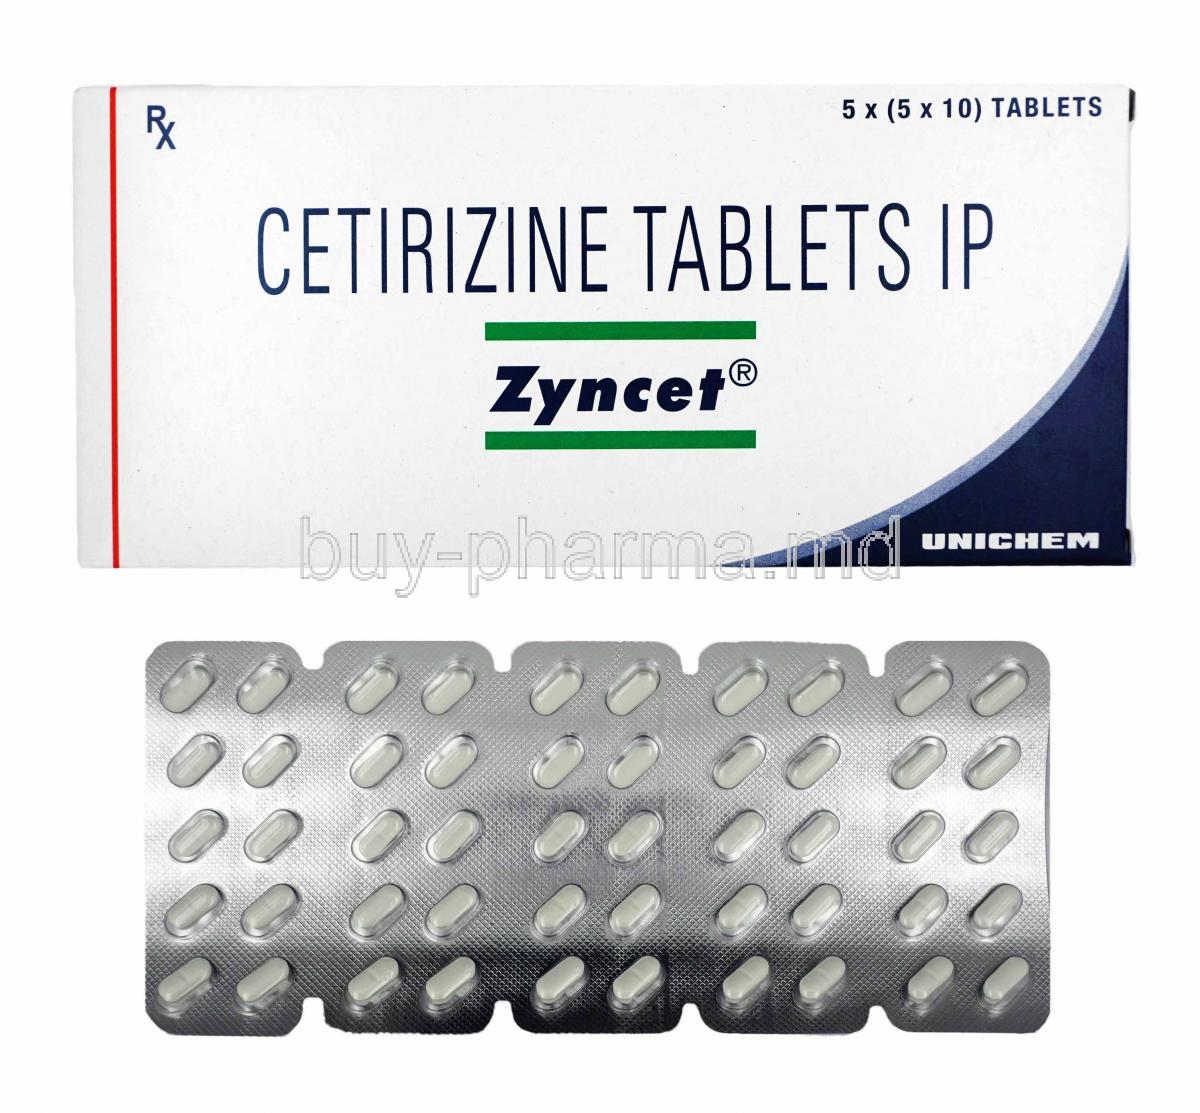 Zyncet, Cetirizine box and tablets